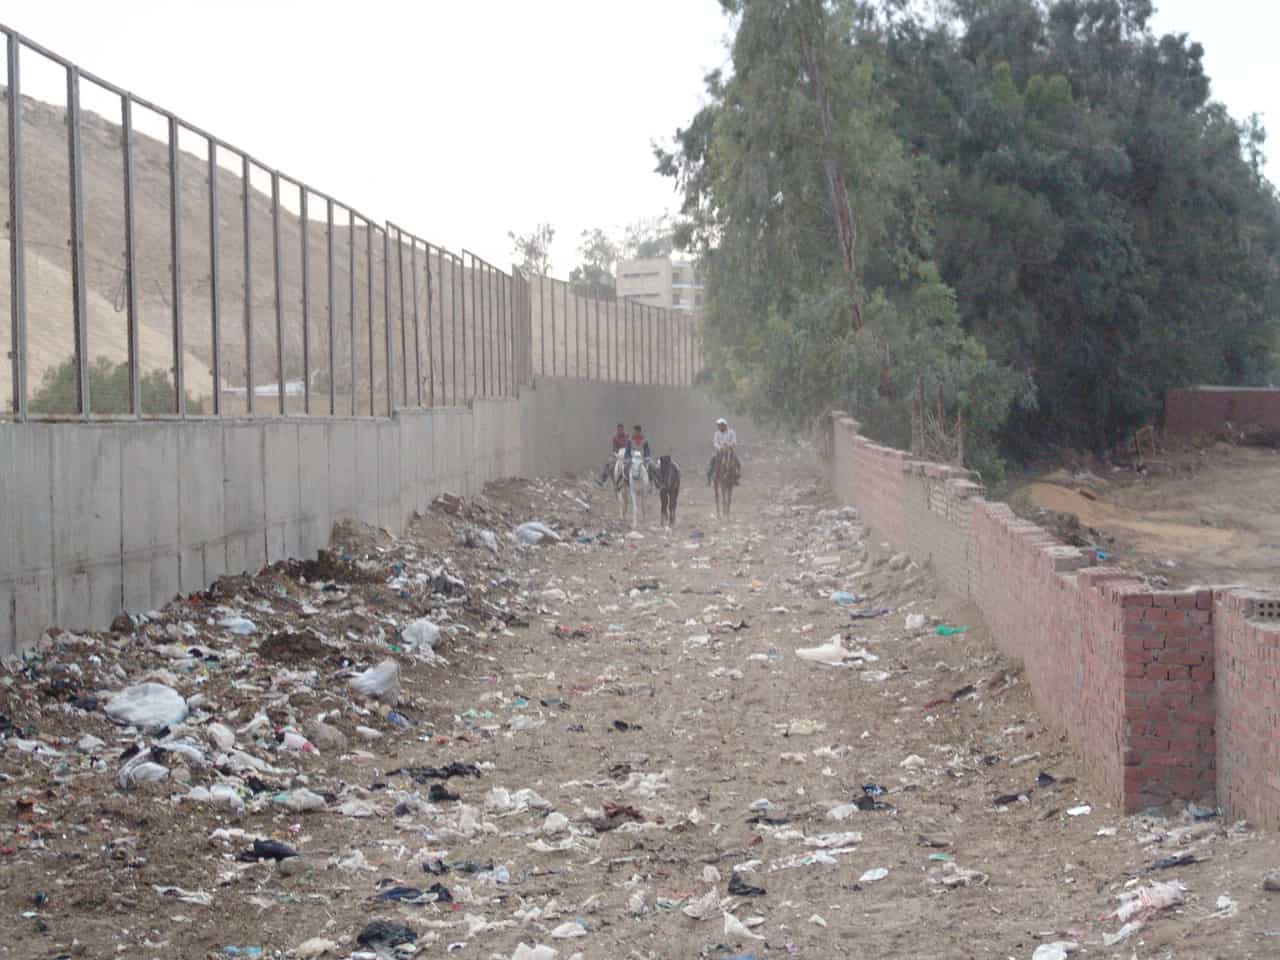 A river of garbage in Giza, Egypt